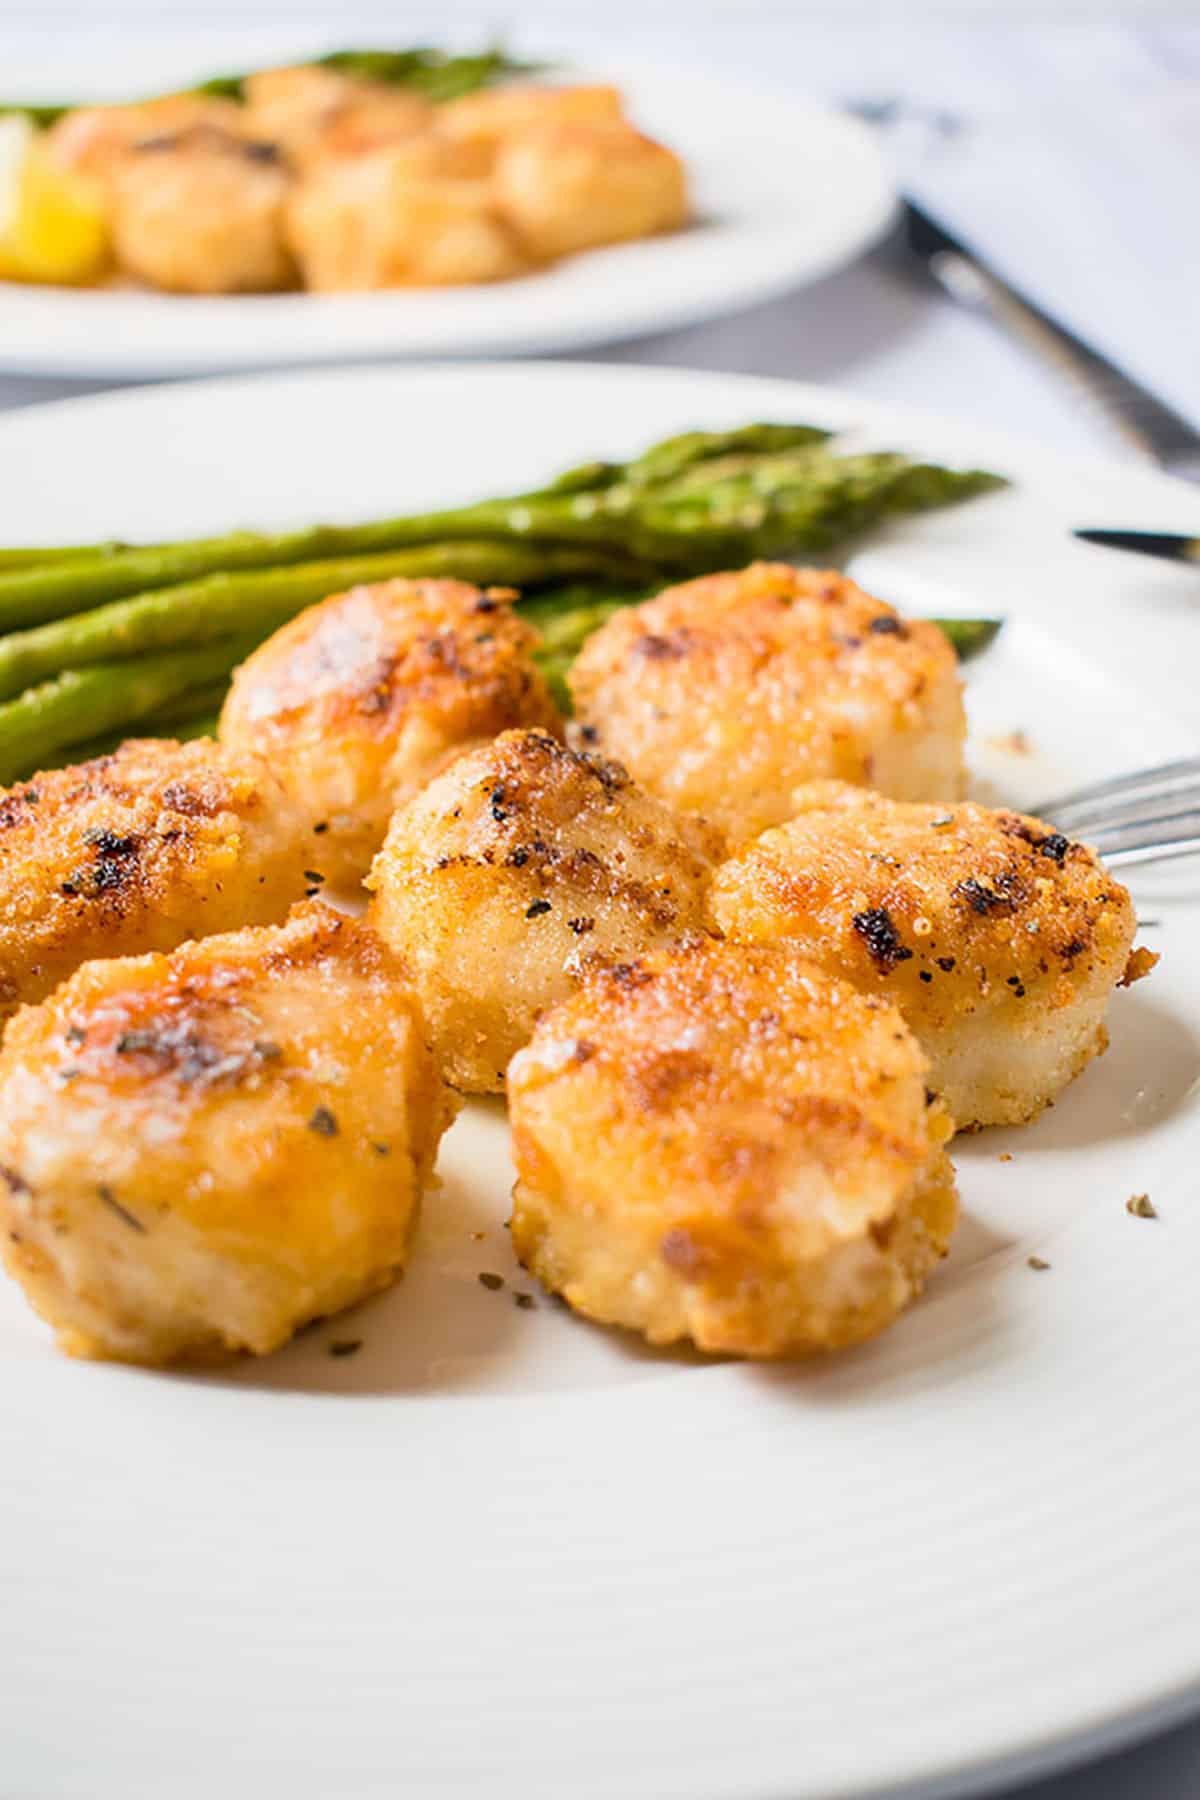 close-up photo of broiled scallops with parmesan bread crumbs in front of asparagus on a plate